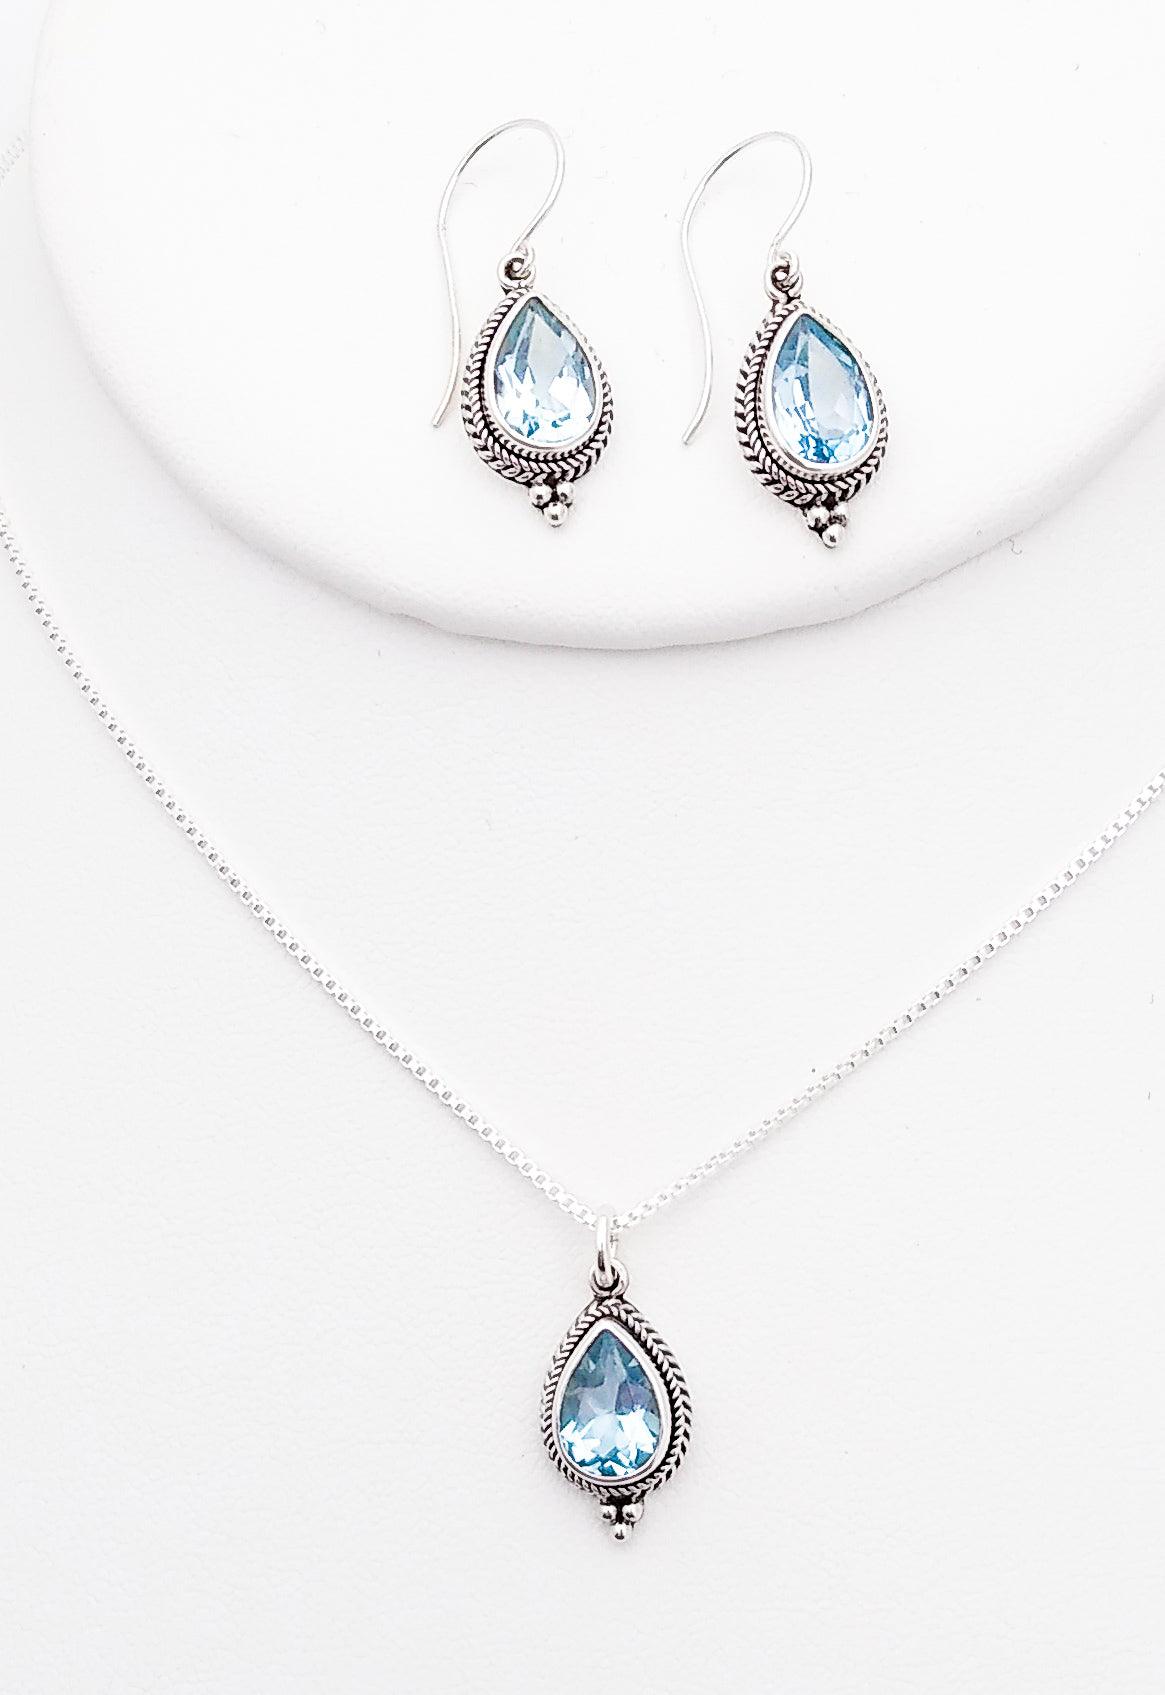 Sterling silver teardrop-shaped drop earrings on a French wire with ornate setting around a Blue Topaz stone in the middle. December birth stone. Matching pendant available.